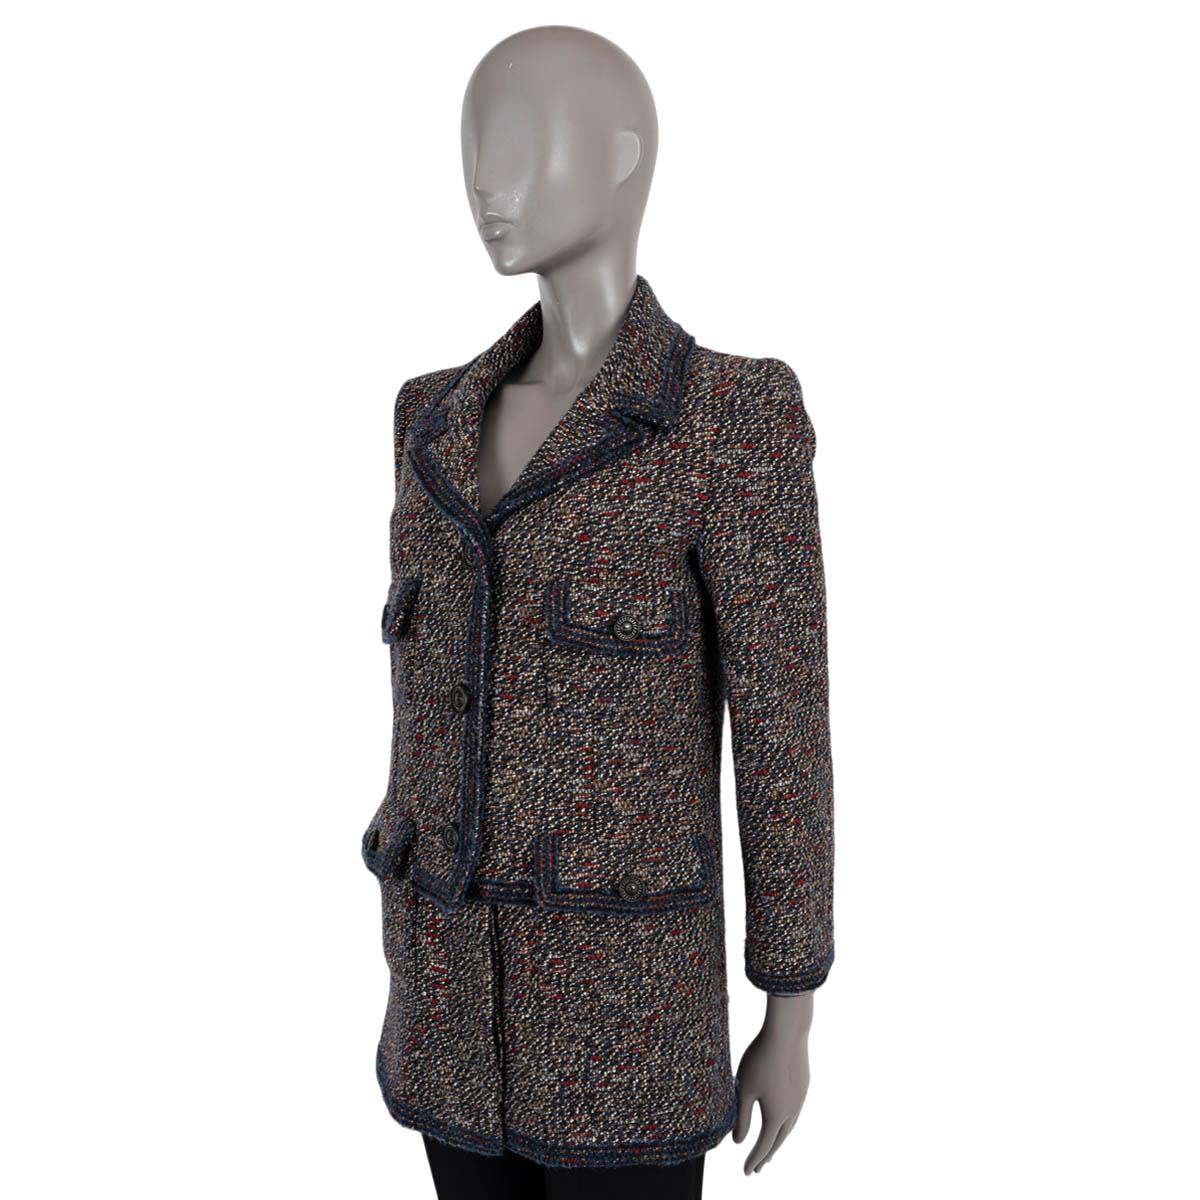 100% authentic Chanel tweed jacket in black, brown, navy and red wool (60%), nylon (26%), mohair (7%) and alpaca (7%). Features four flap pockets, a peak lapel and a split bottom hem. Closes with metal buttons on the front and is lined in silk